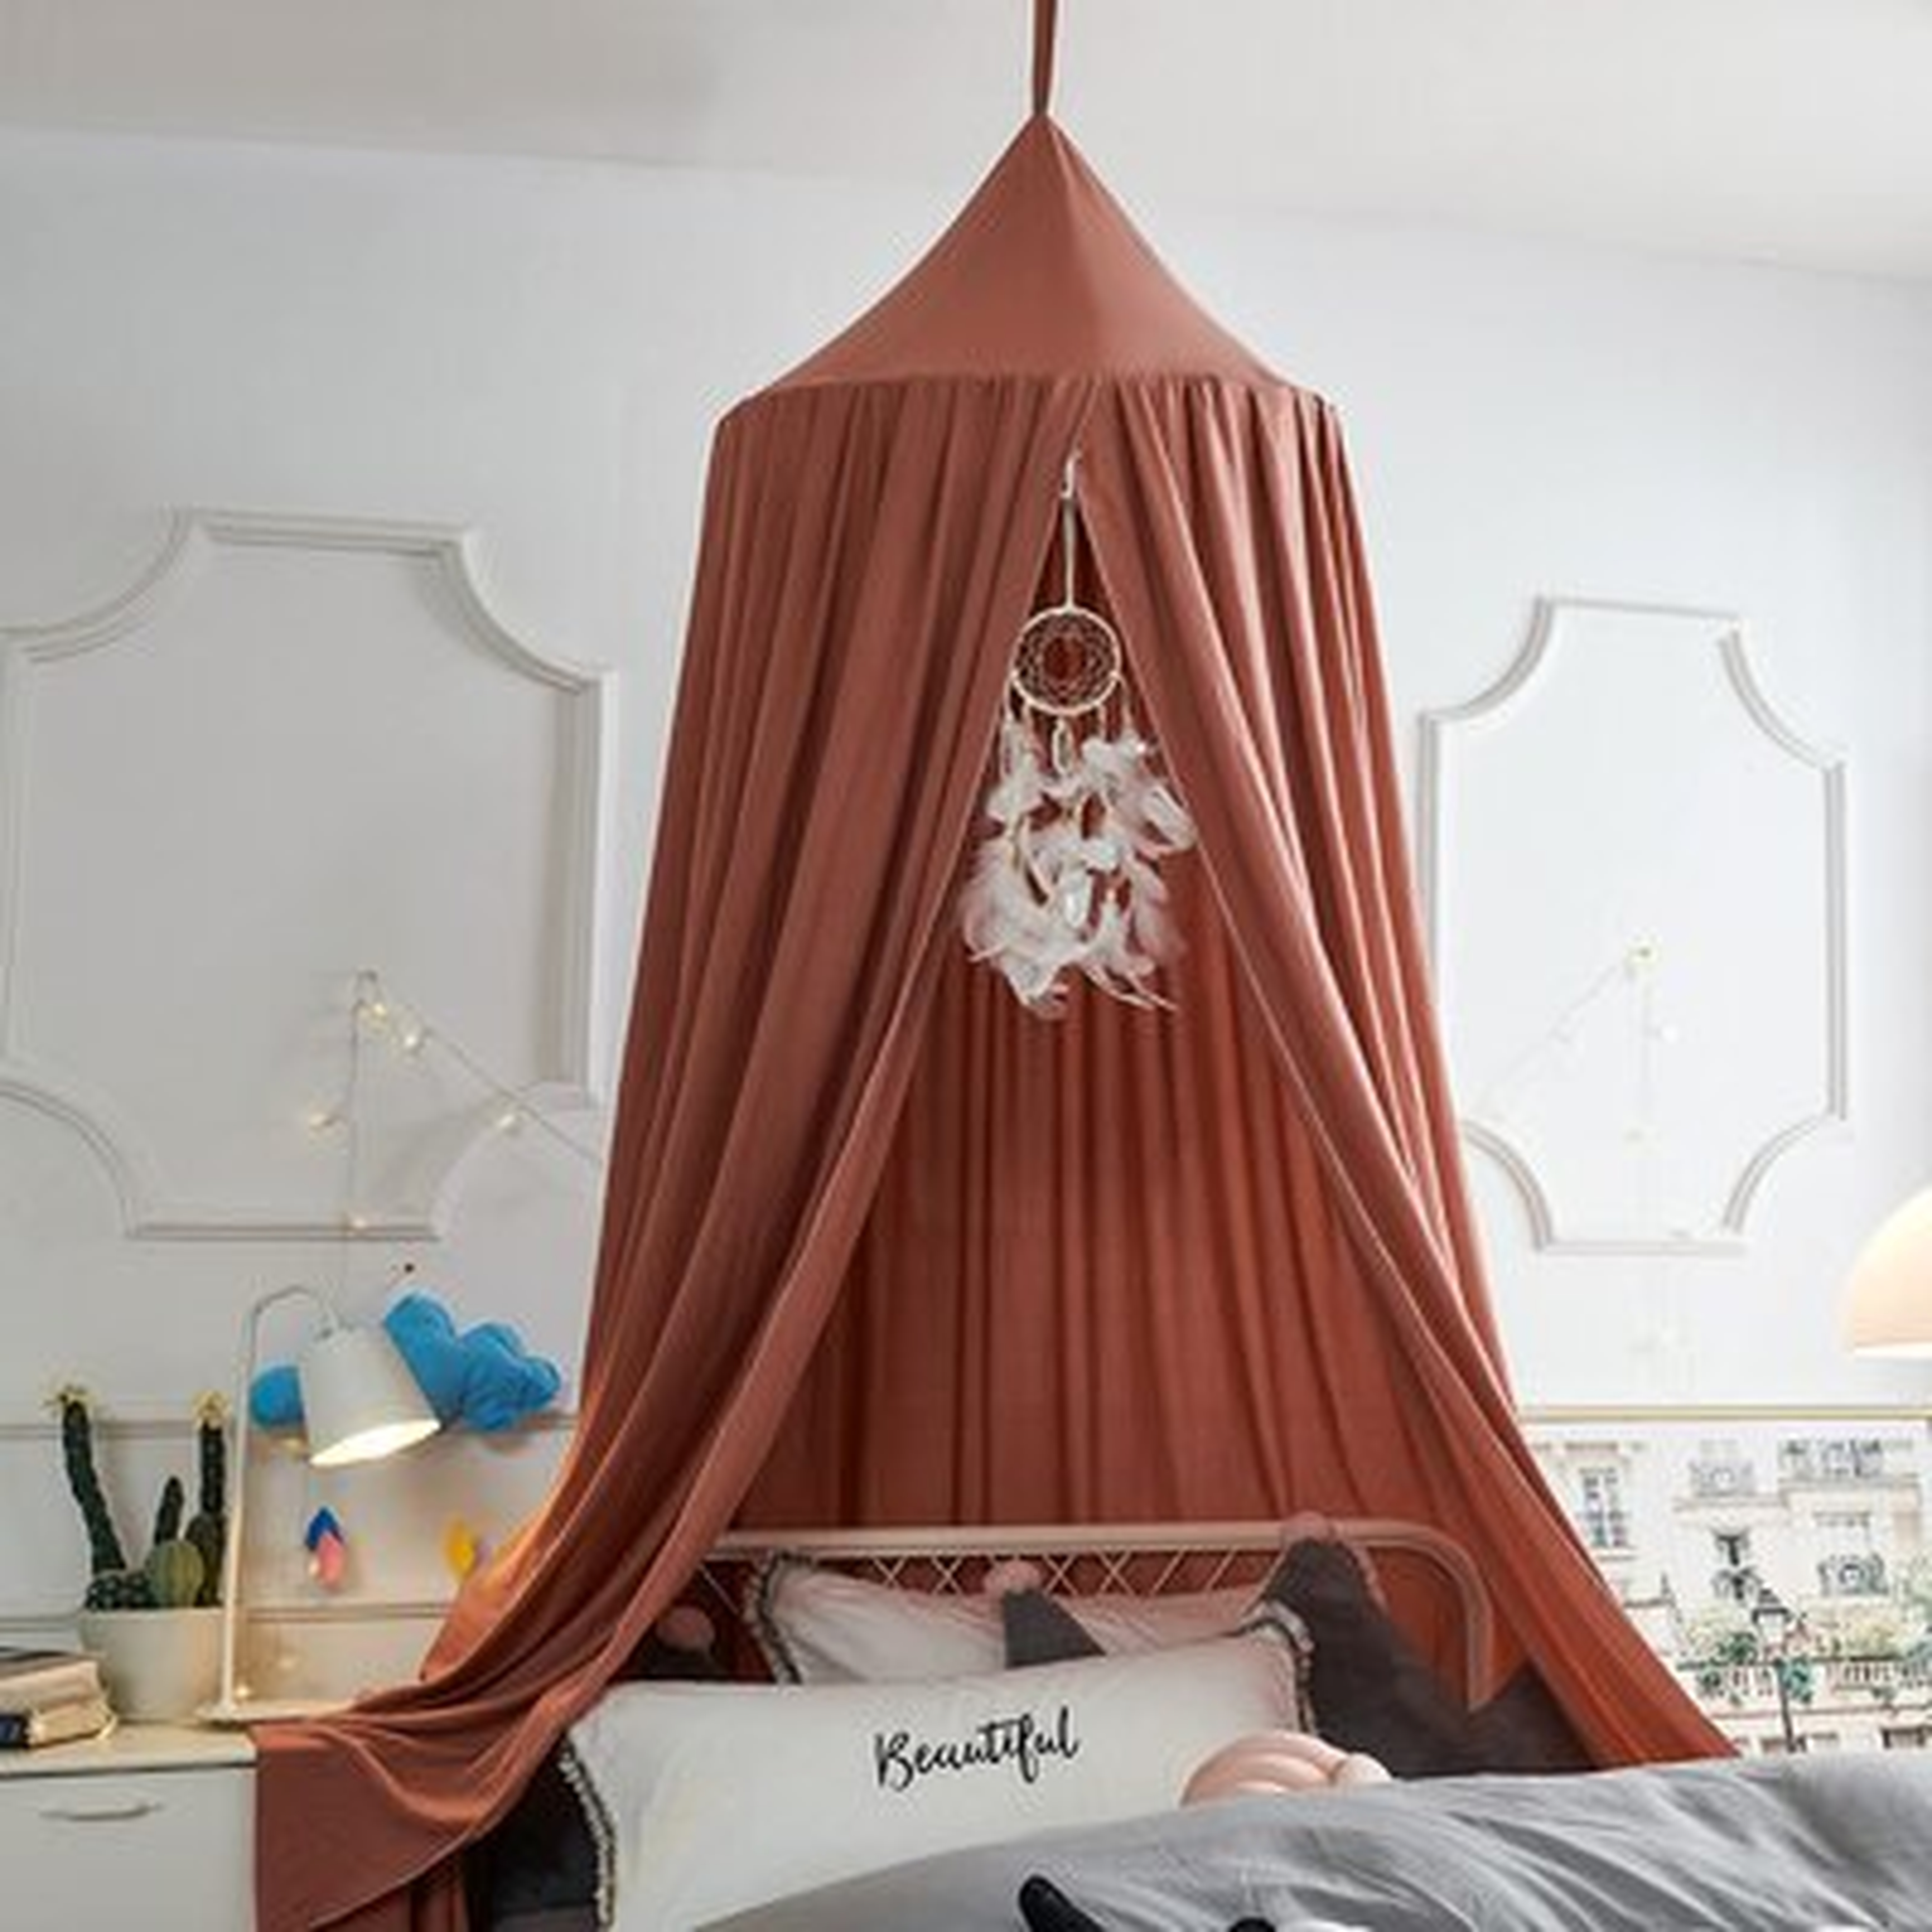 Princess Bed Canopy For Girls Kids Baby Bed, Prince Round Dome Kids Mosquito Net Canopies Indoor Outdoor Castle Play Tent Hanging House Decoration Reading Nook - Wayfair